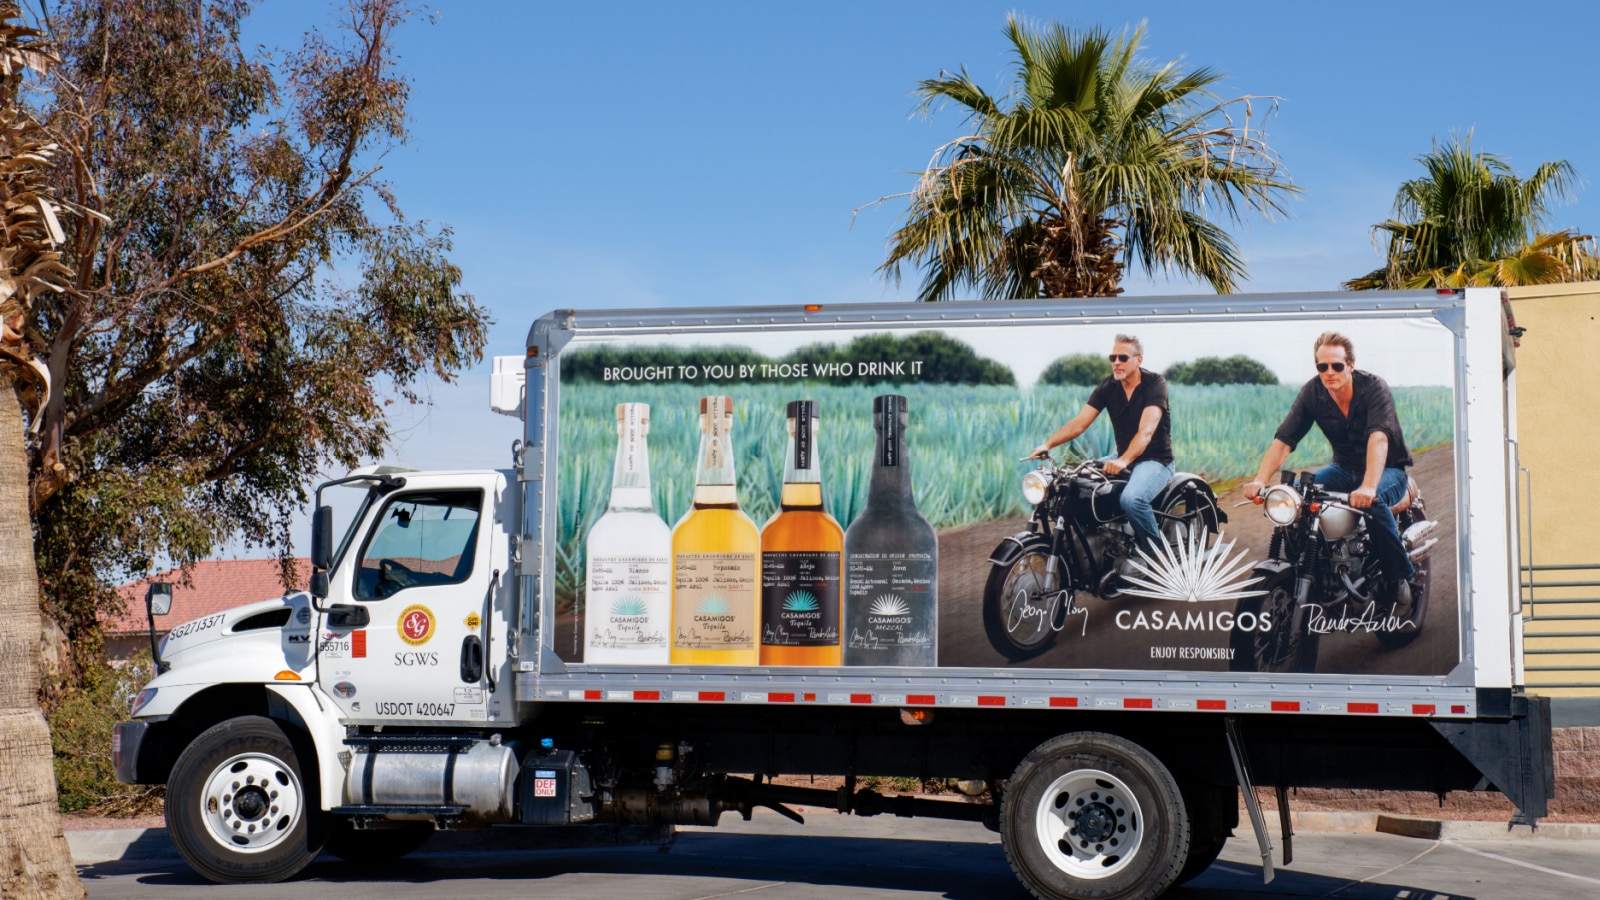 Lake Havasu City, AZ - March 10, 2023: Delivery truck with advertising for Casamigos, the fastest-growing spirits brand of 2022.